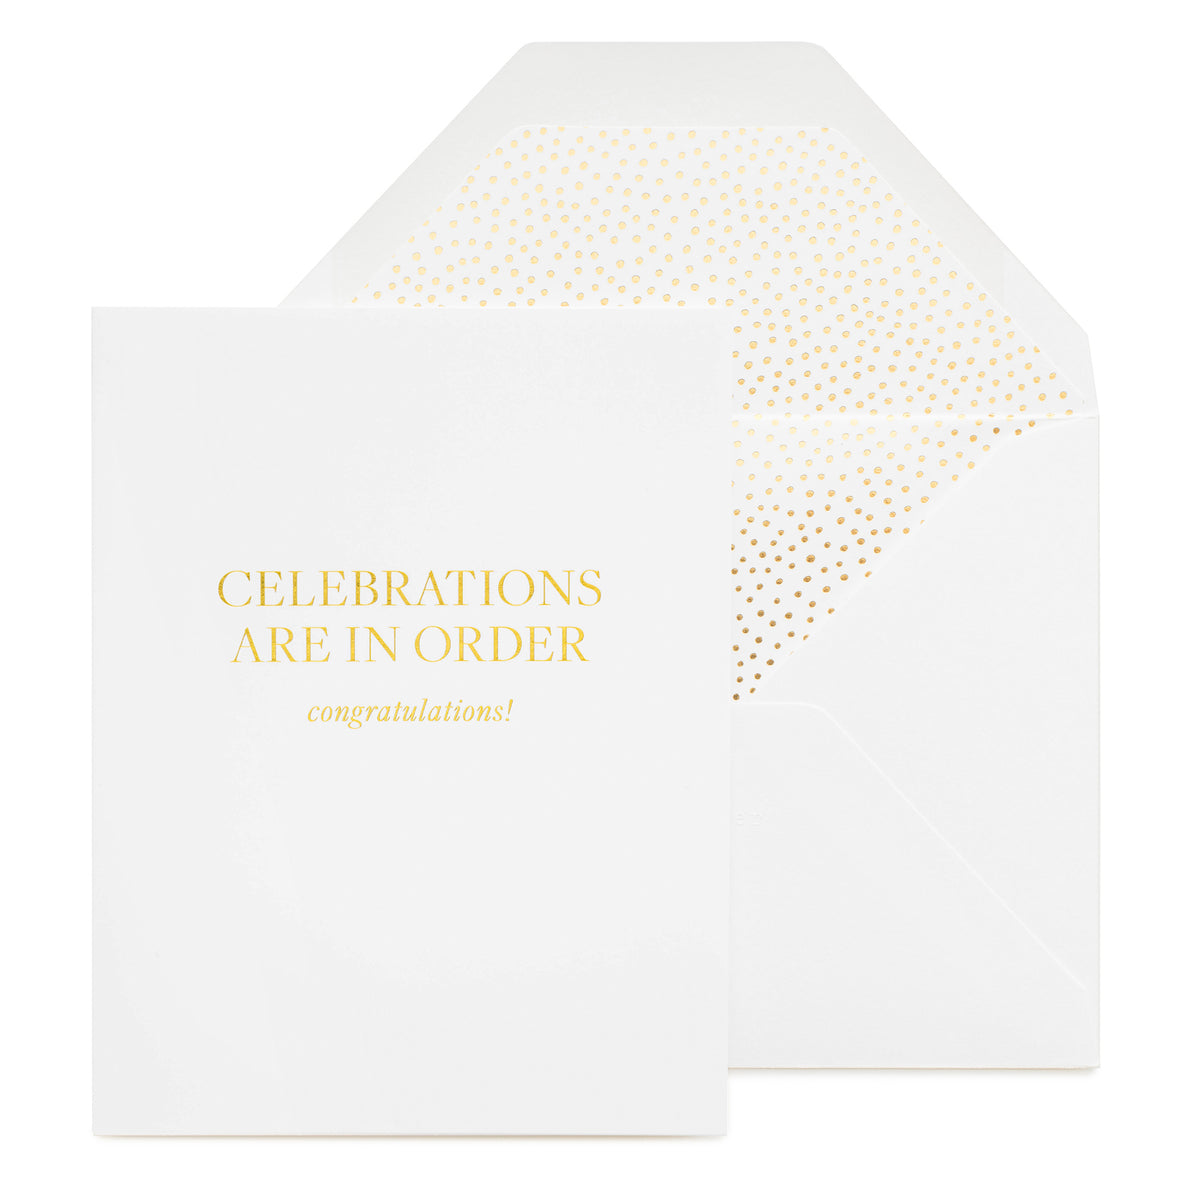 White greeting card printed in gold foil Celebrations Are in Order, Congratulations!